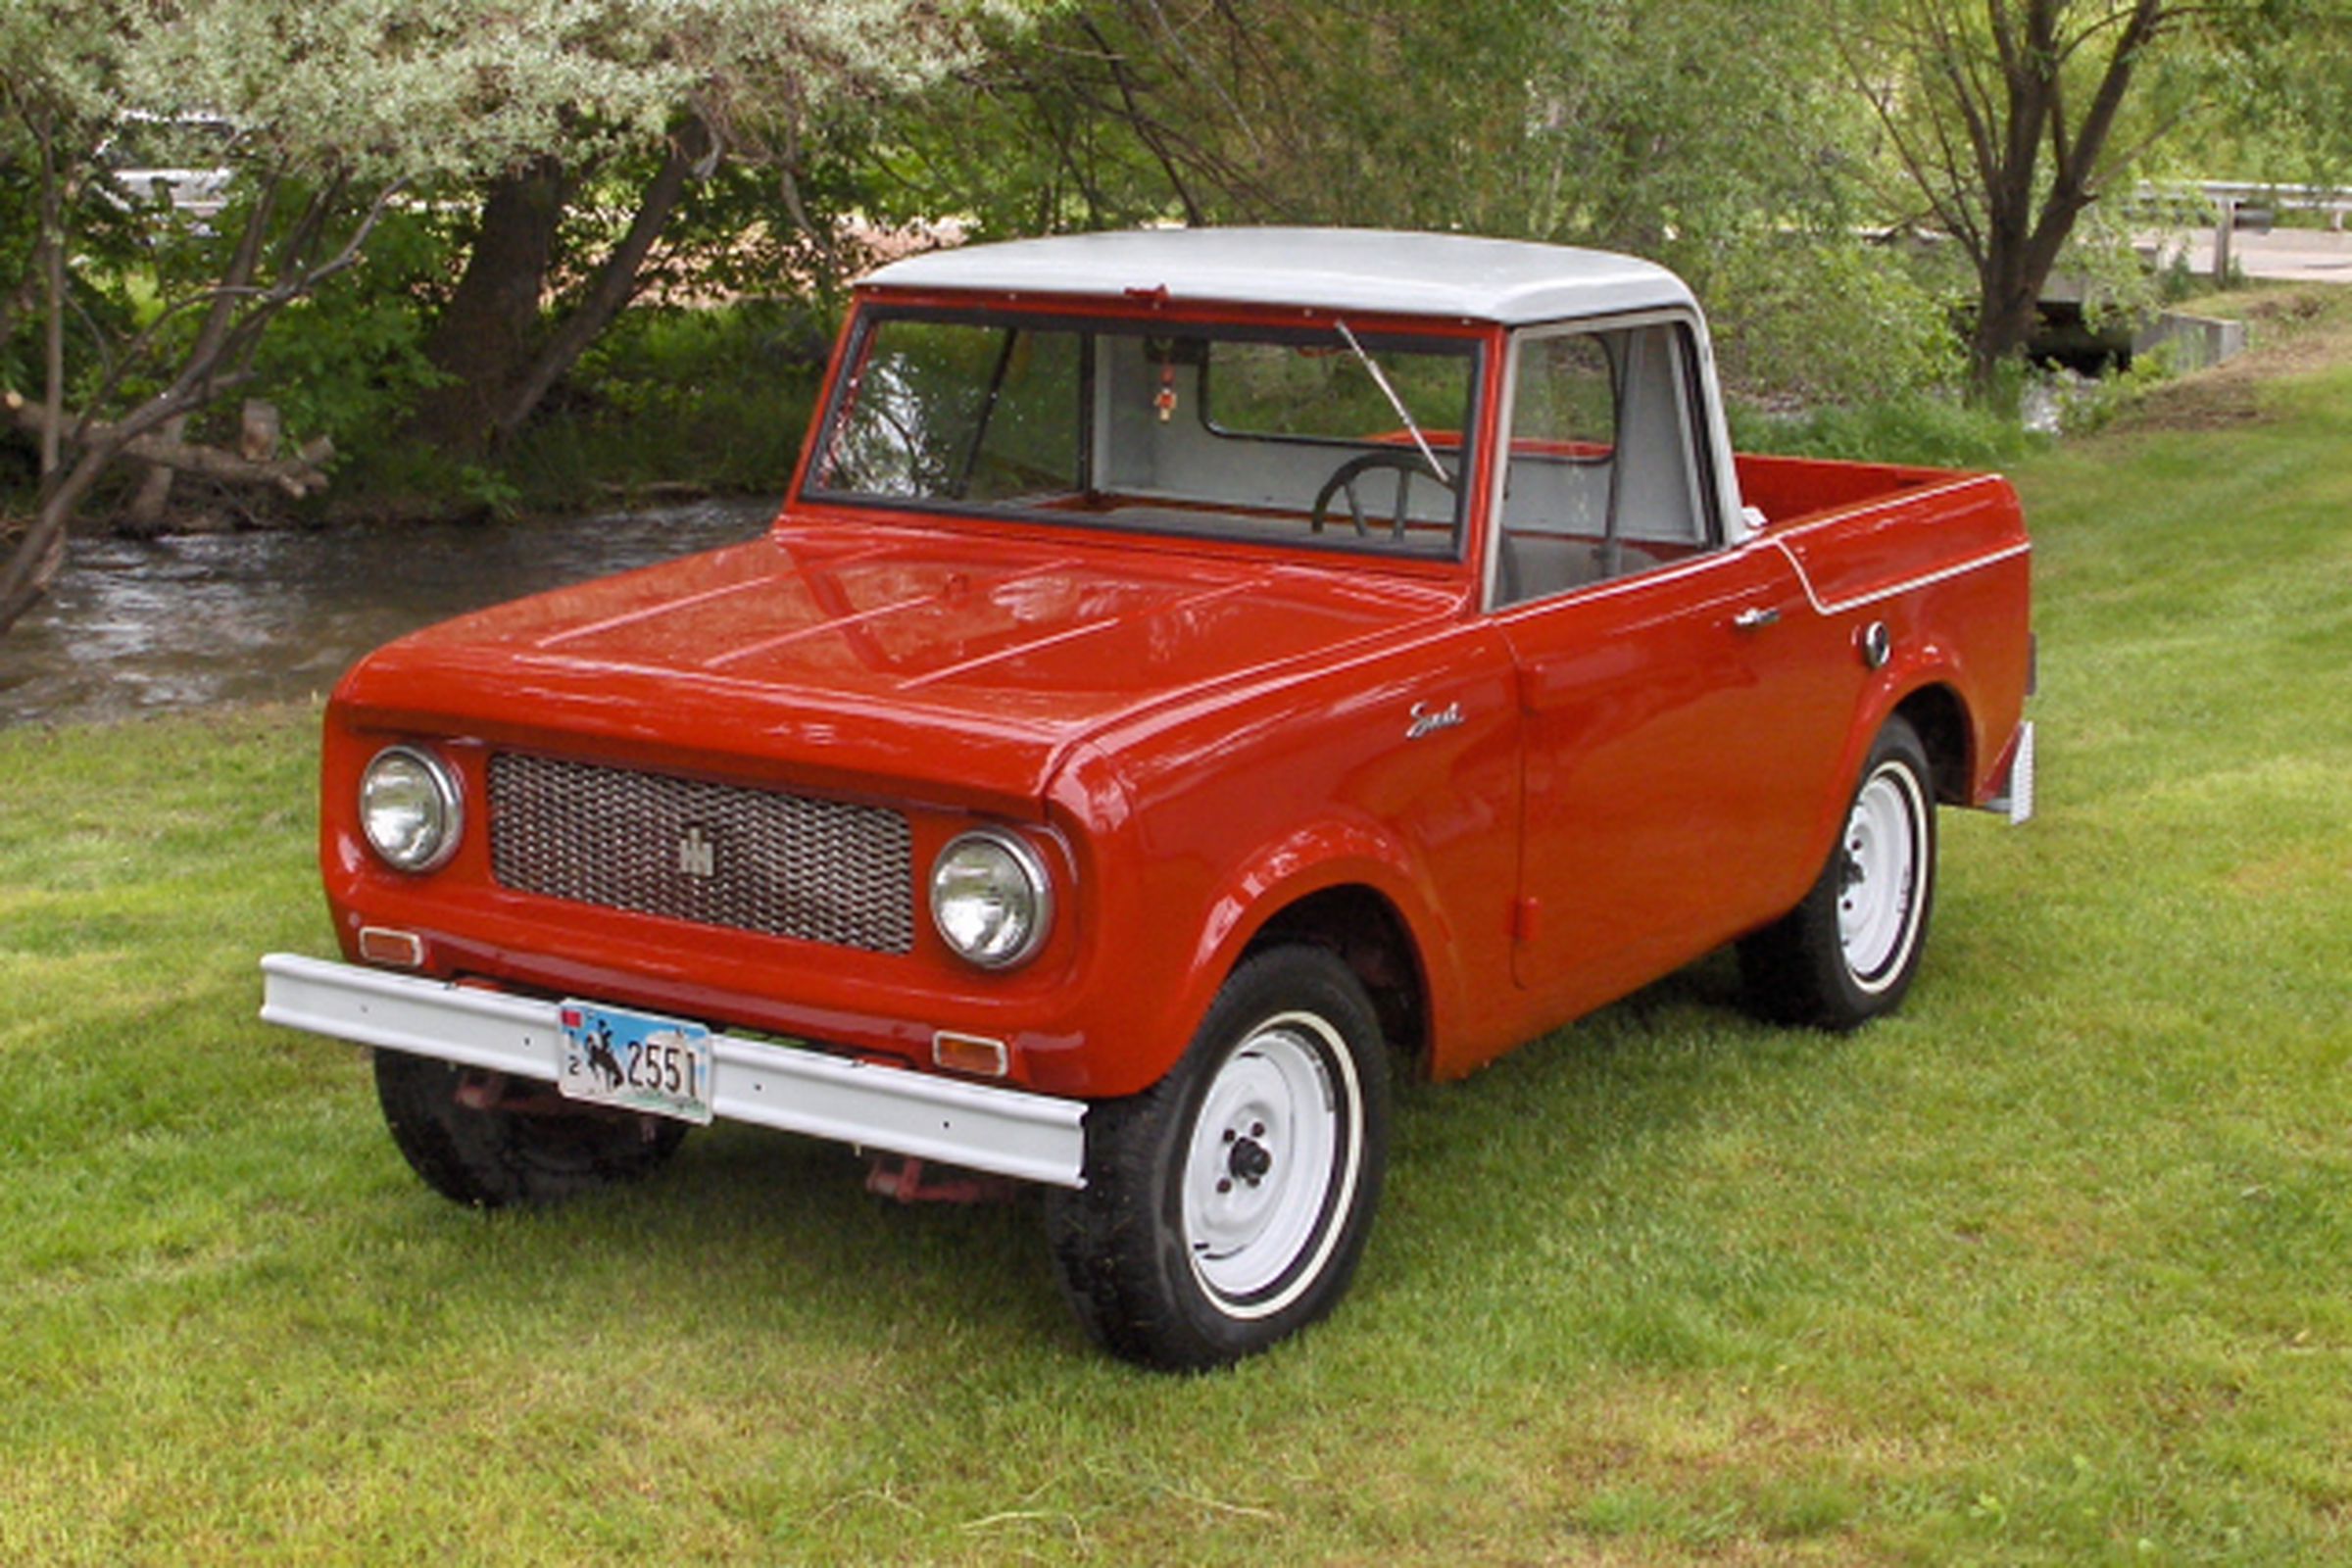 The first model, a 1961 Scout 80, in pickup style with removable hardtop.